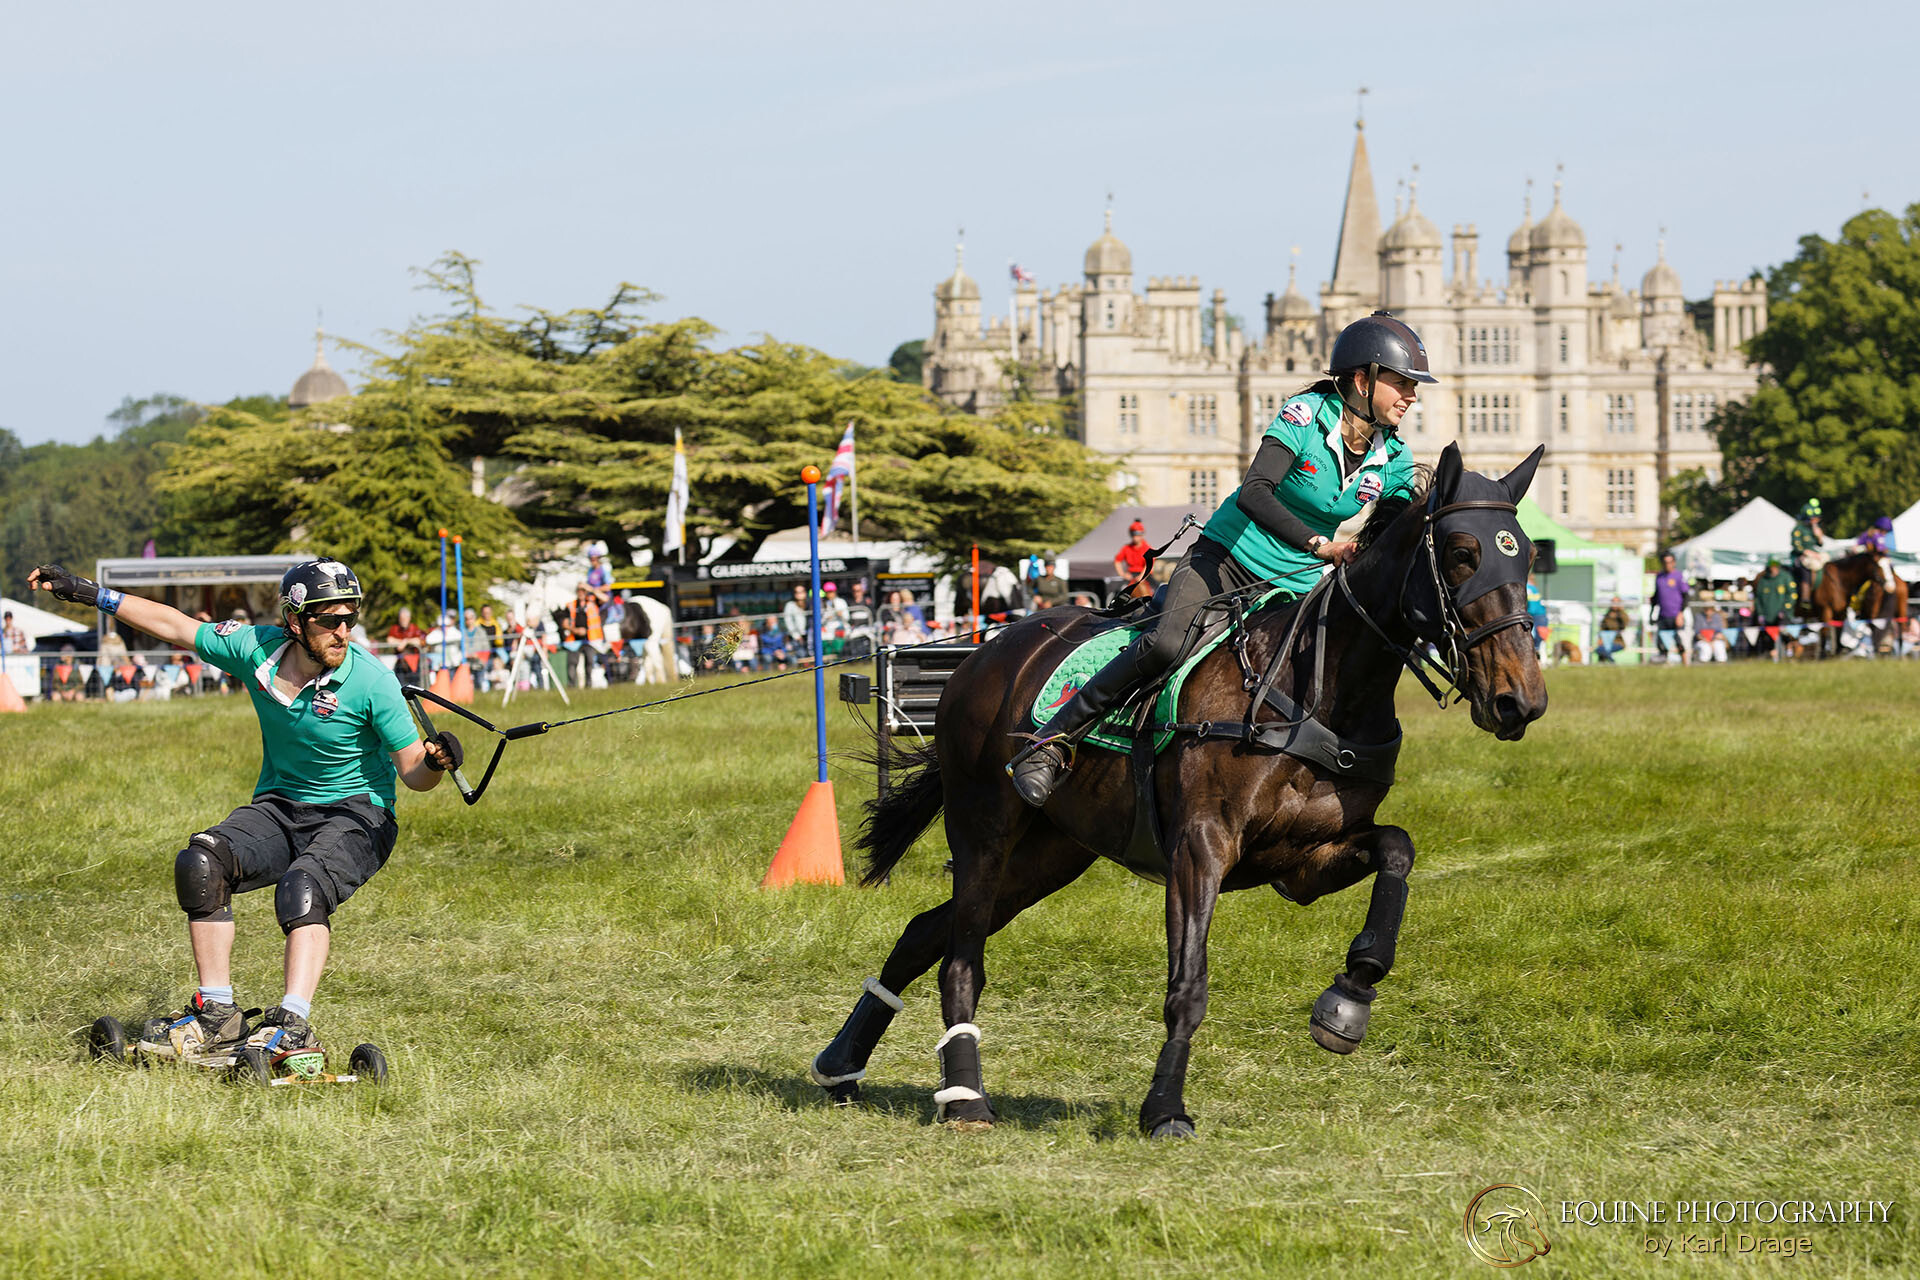 The Dead Pigeon horseboarding team pass Burghley house during the Burghley Game & Country Fair round of the 2023 National Horseboarding Championship